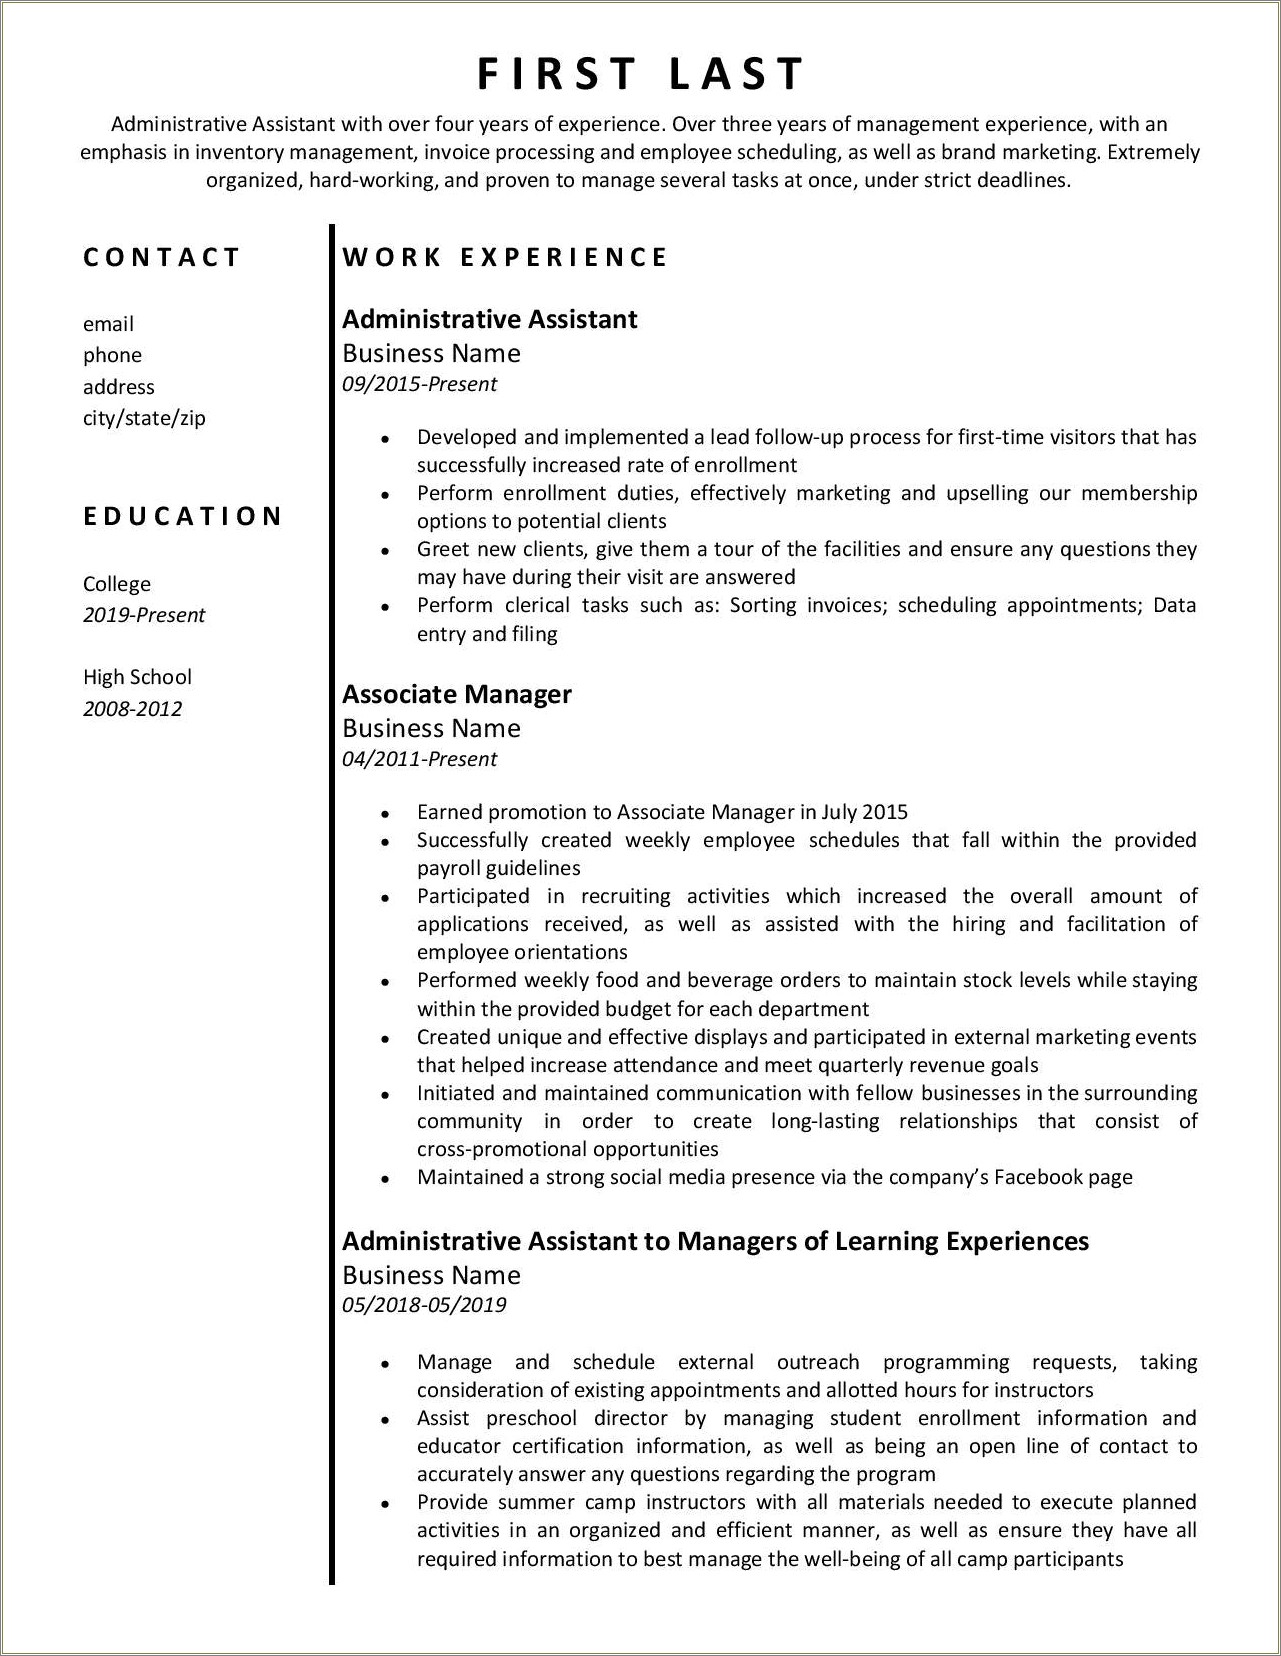 Resume Job Experience Multiple Positions Same Company